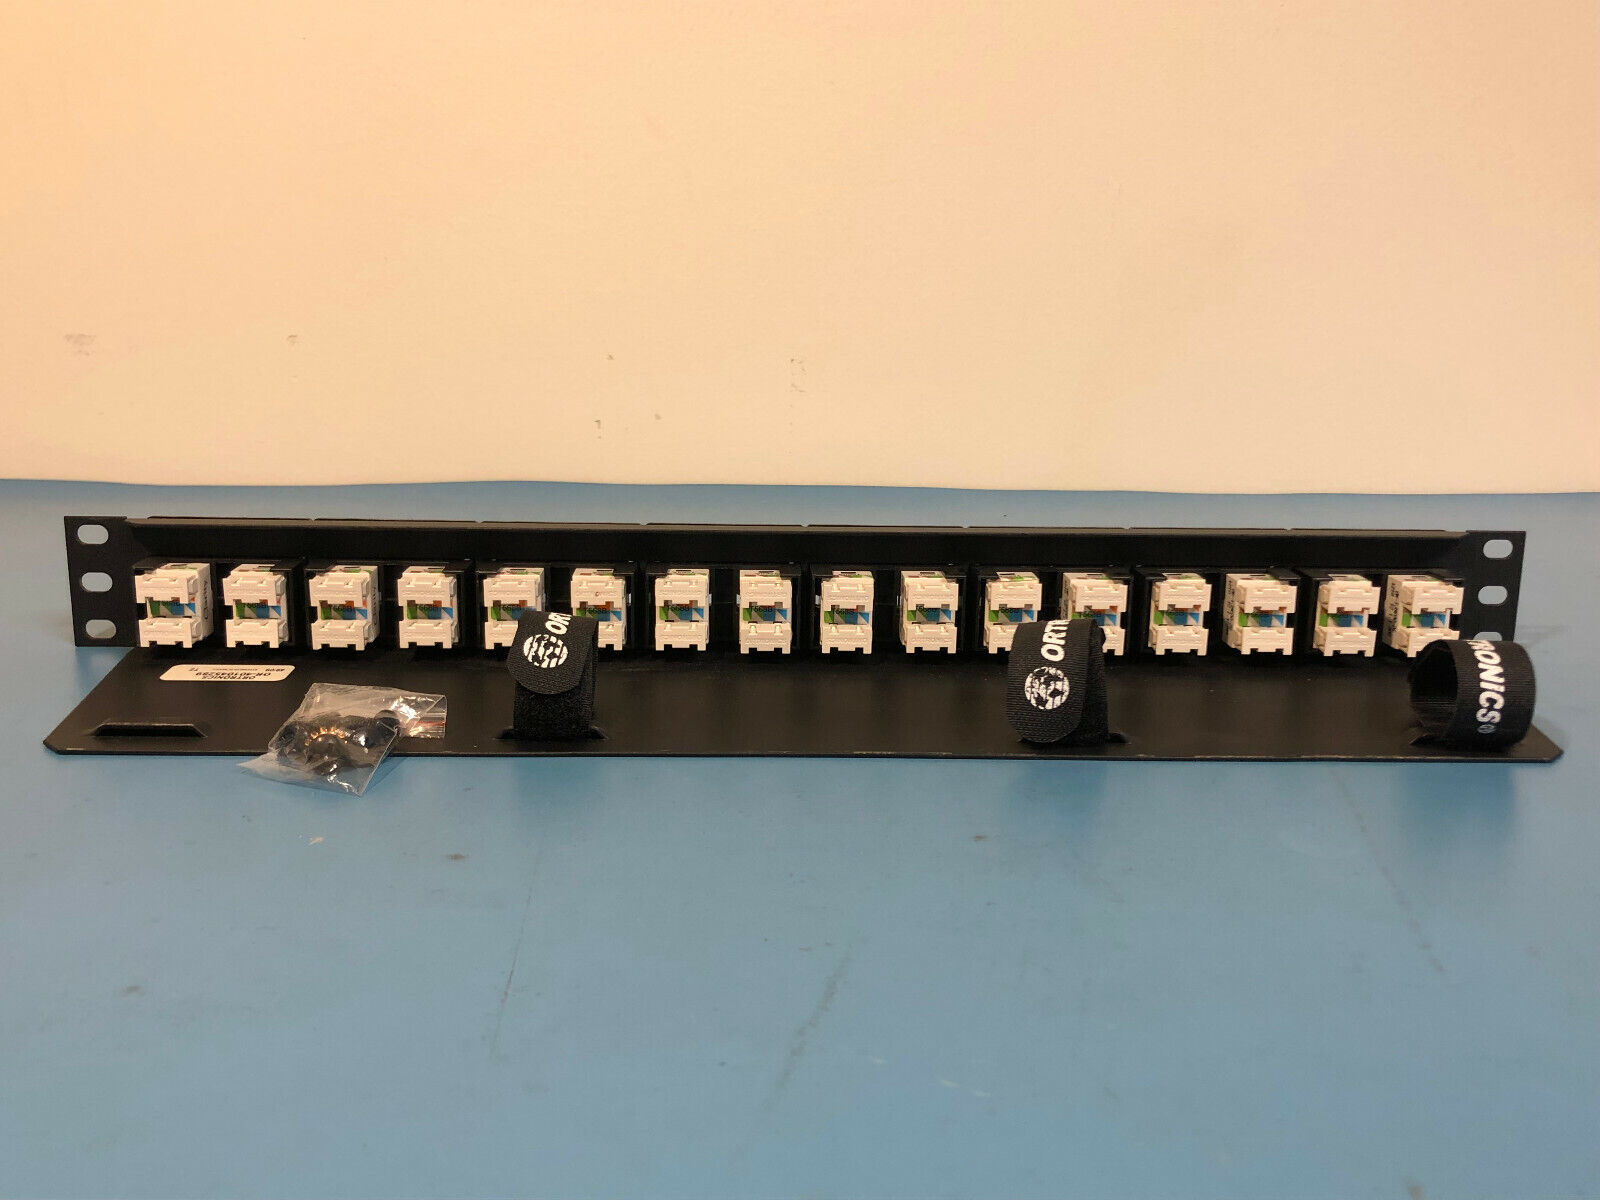 Ortronics 16-Modules 16 Port TRACJACK Cat 5e Ethernet Patch Panel OR-401045289.